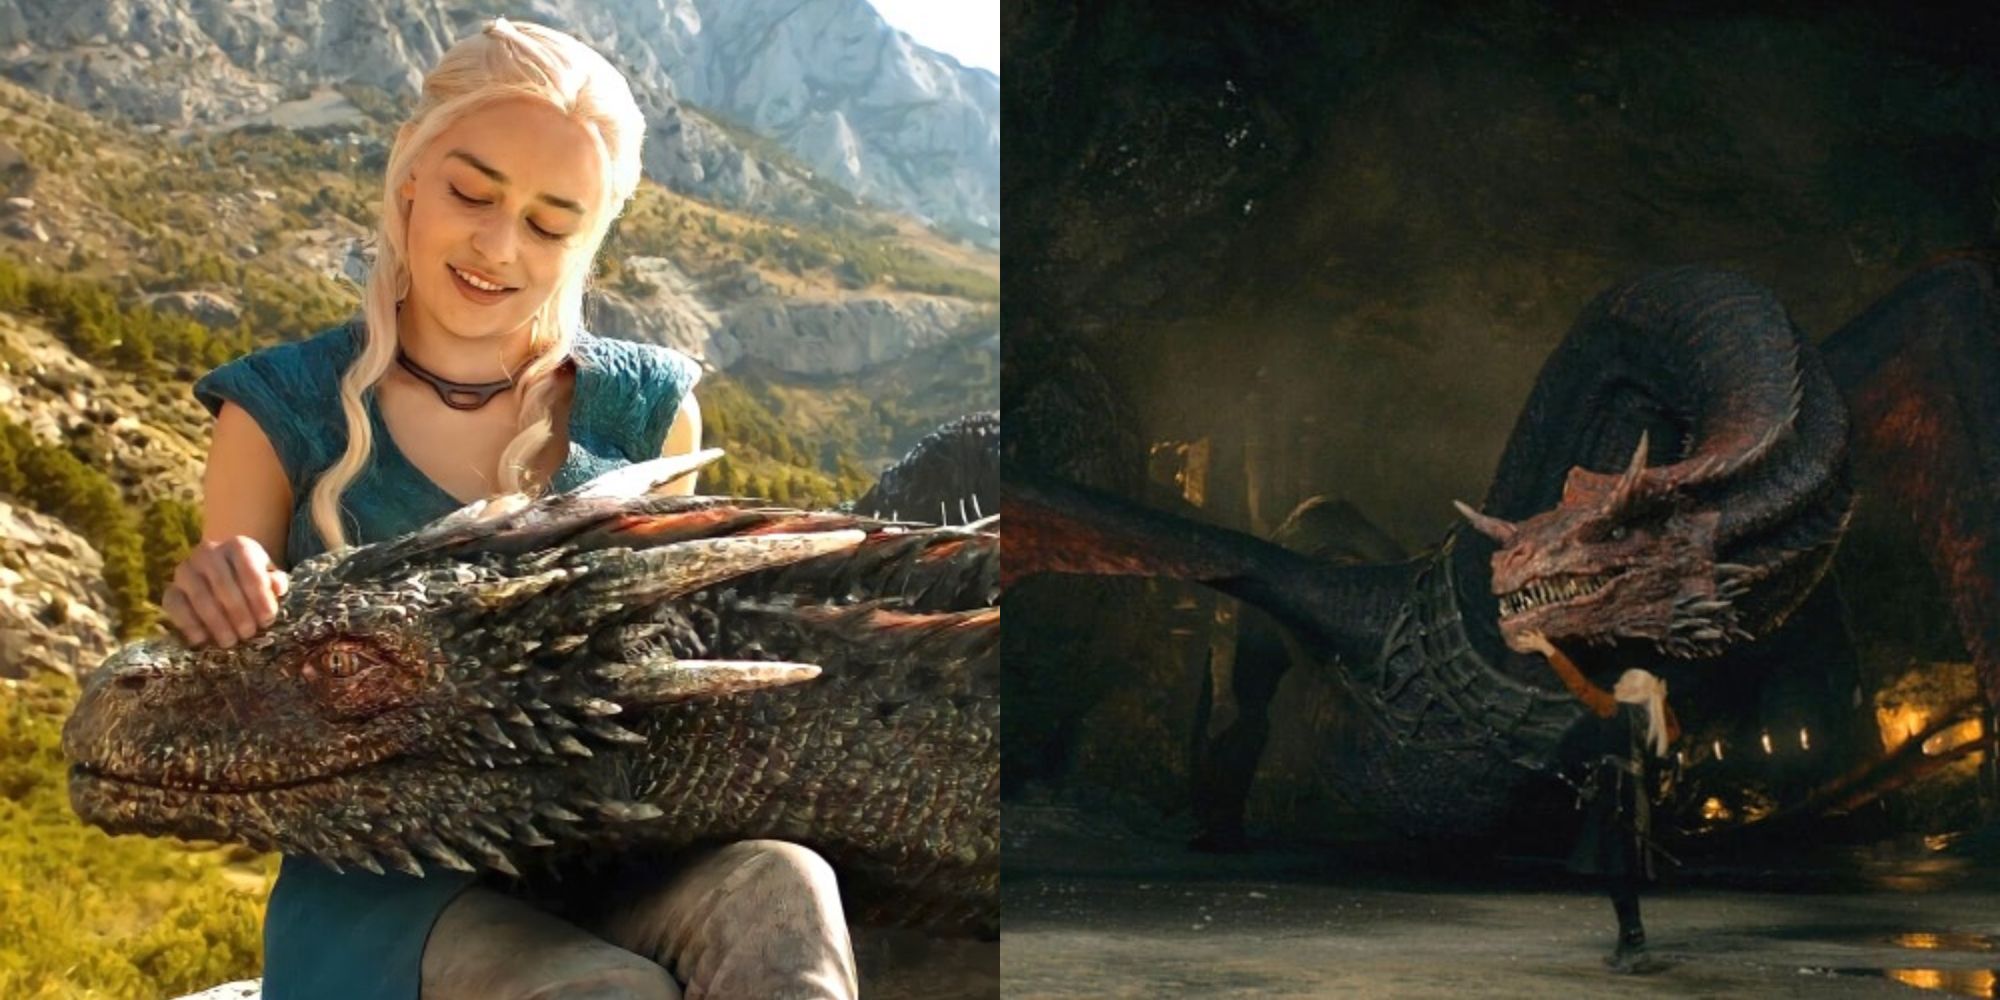 10 Facts About The Bonds Between Dragons & Riders That House Of The Dragon Leaves Out